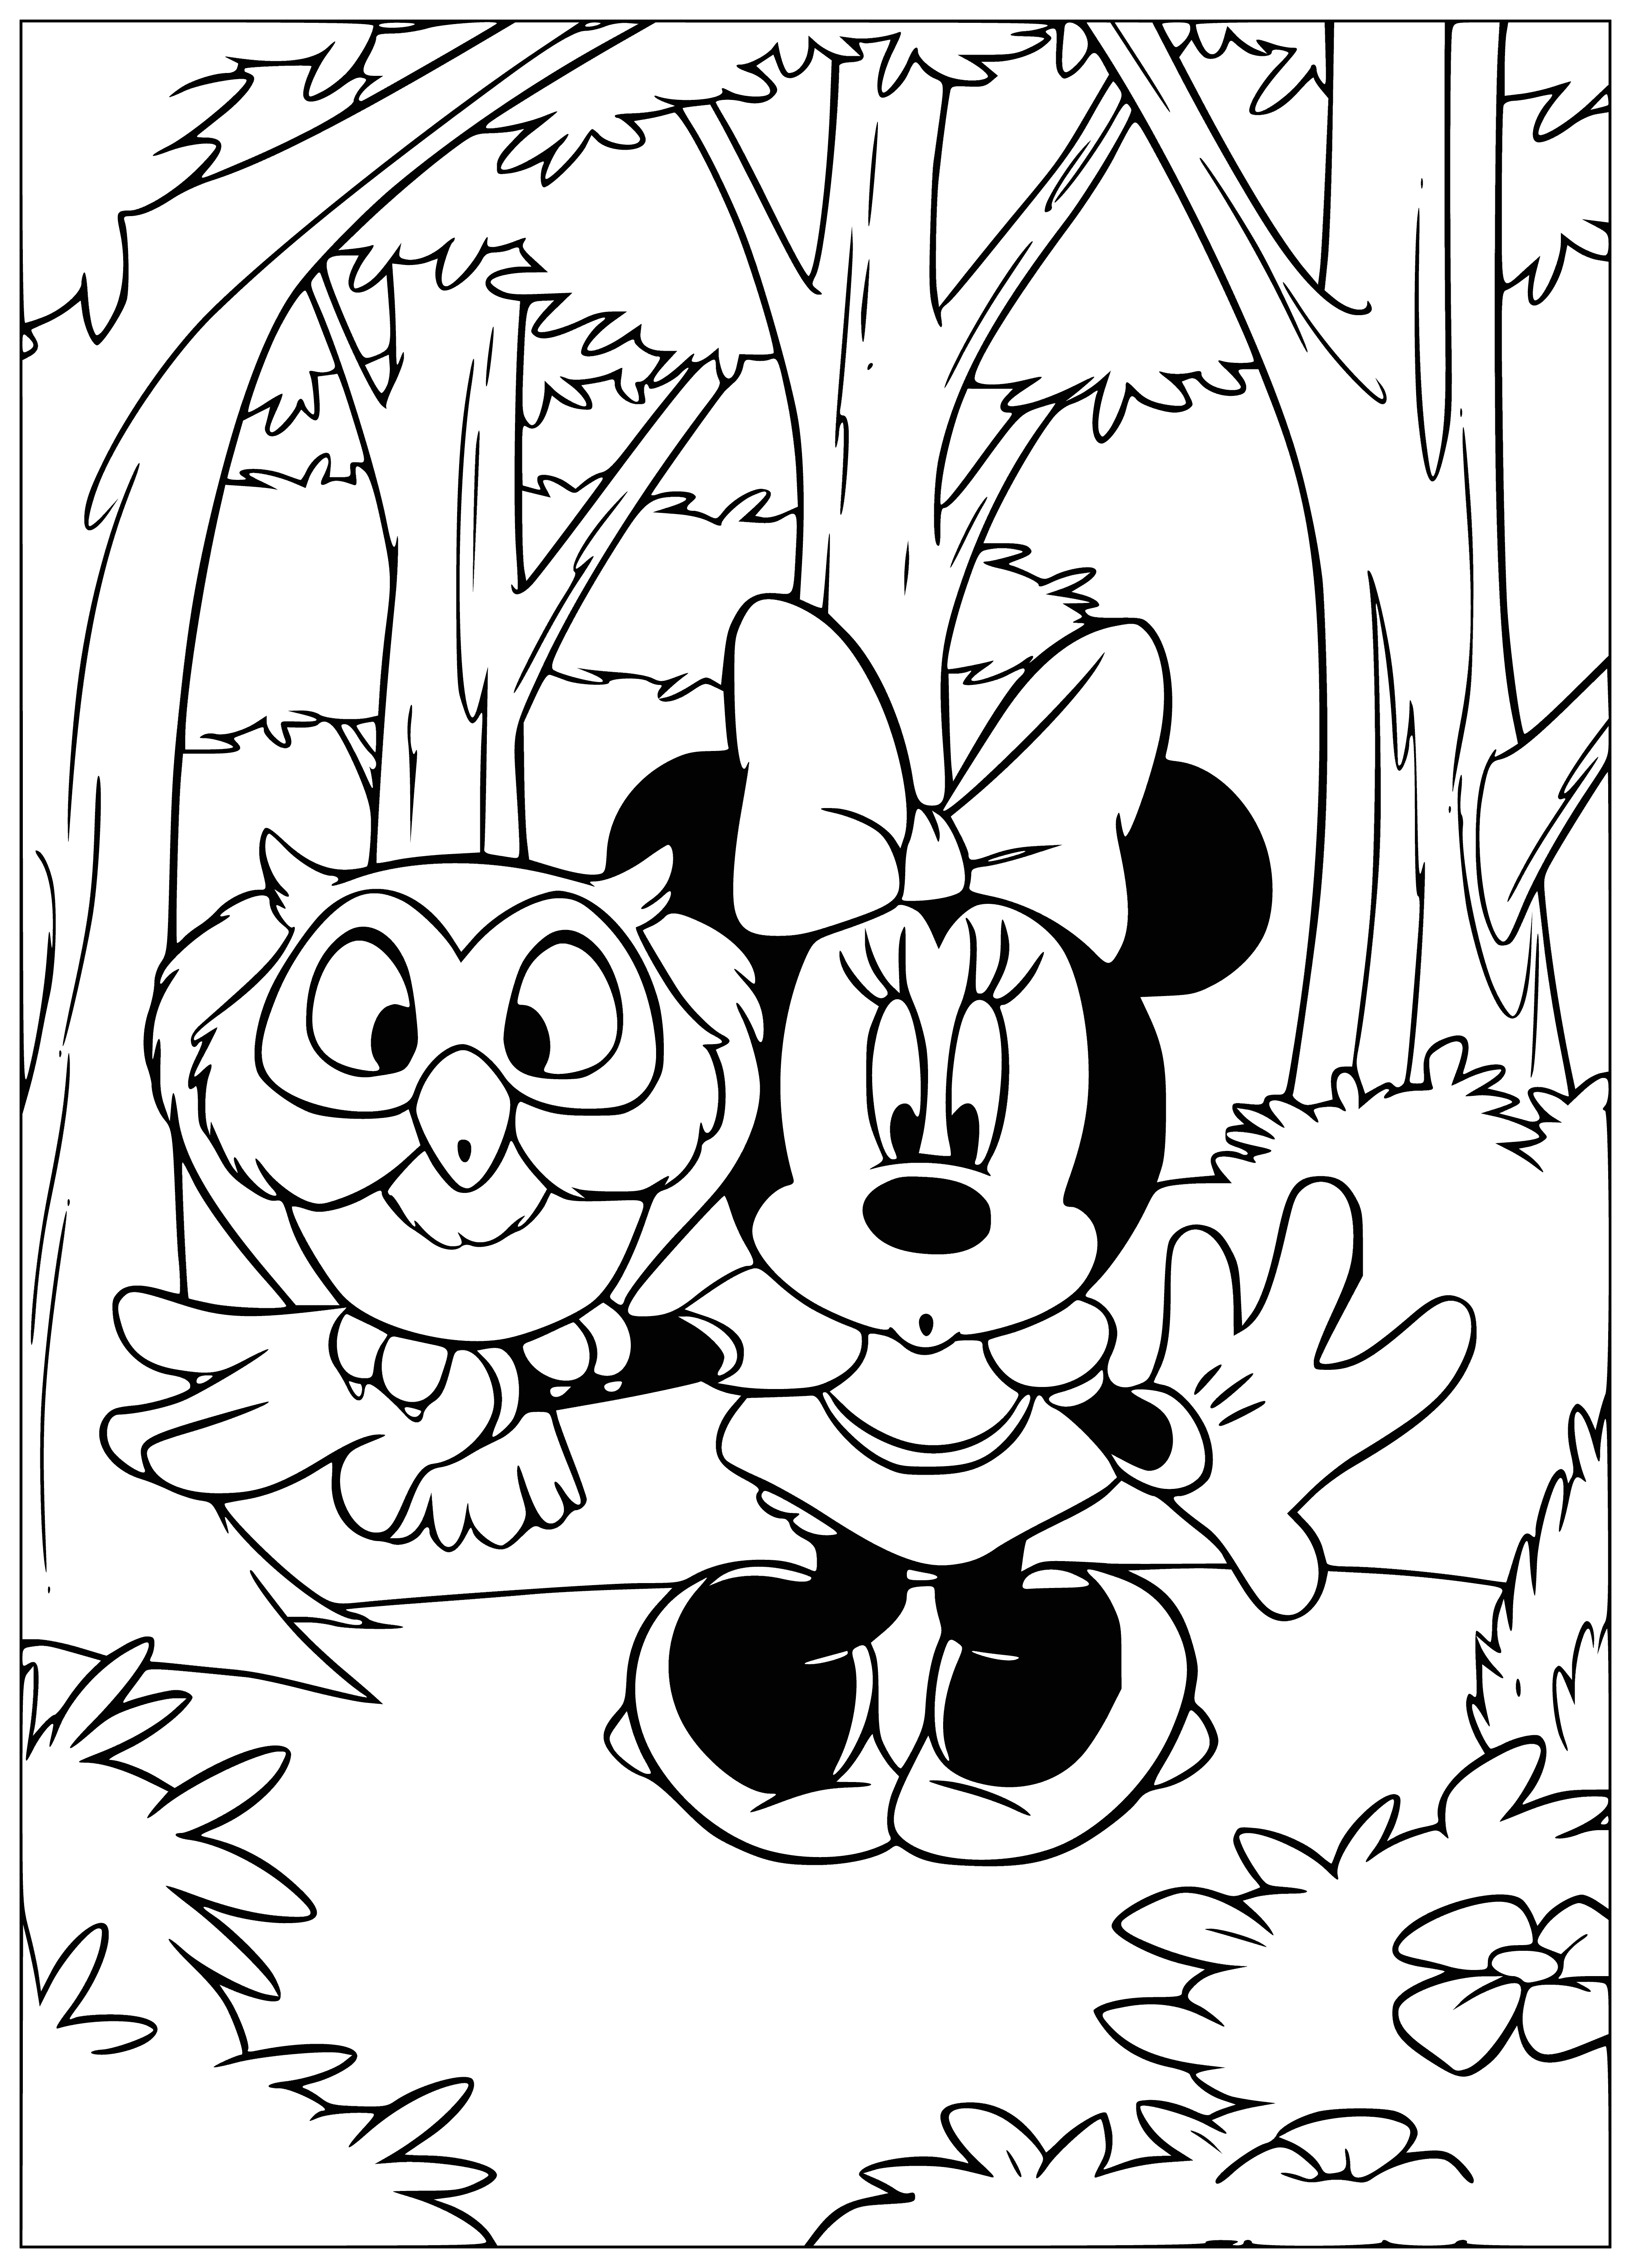 coloring page: 3 mice in coloring page: Mickey, Minnie & Goofy, each with their own ear/nose & holding items, in a forest w/ trees & bushes.